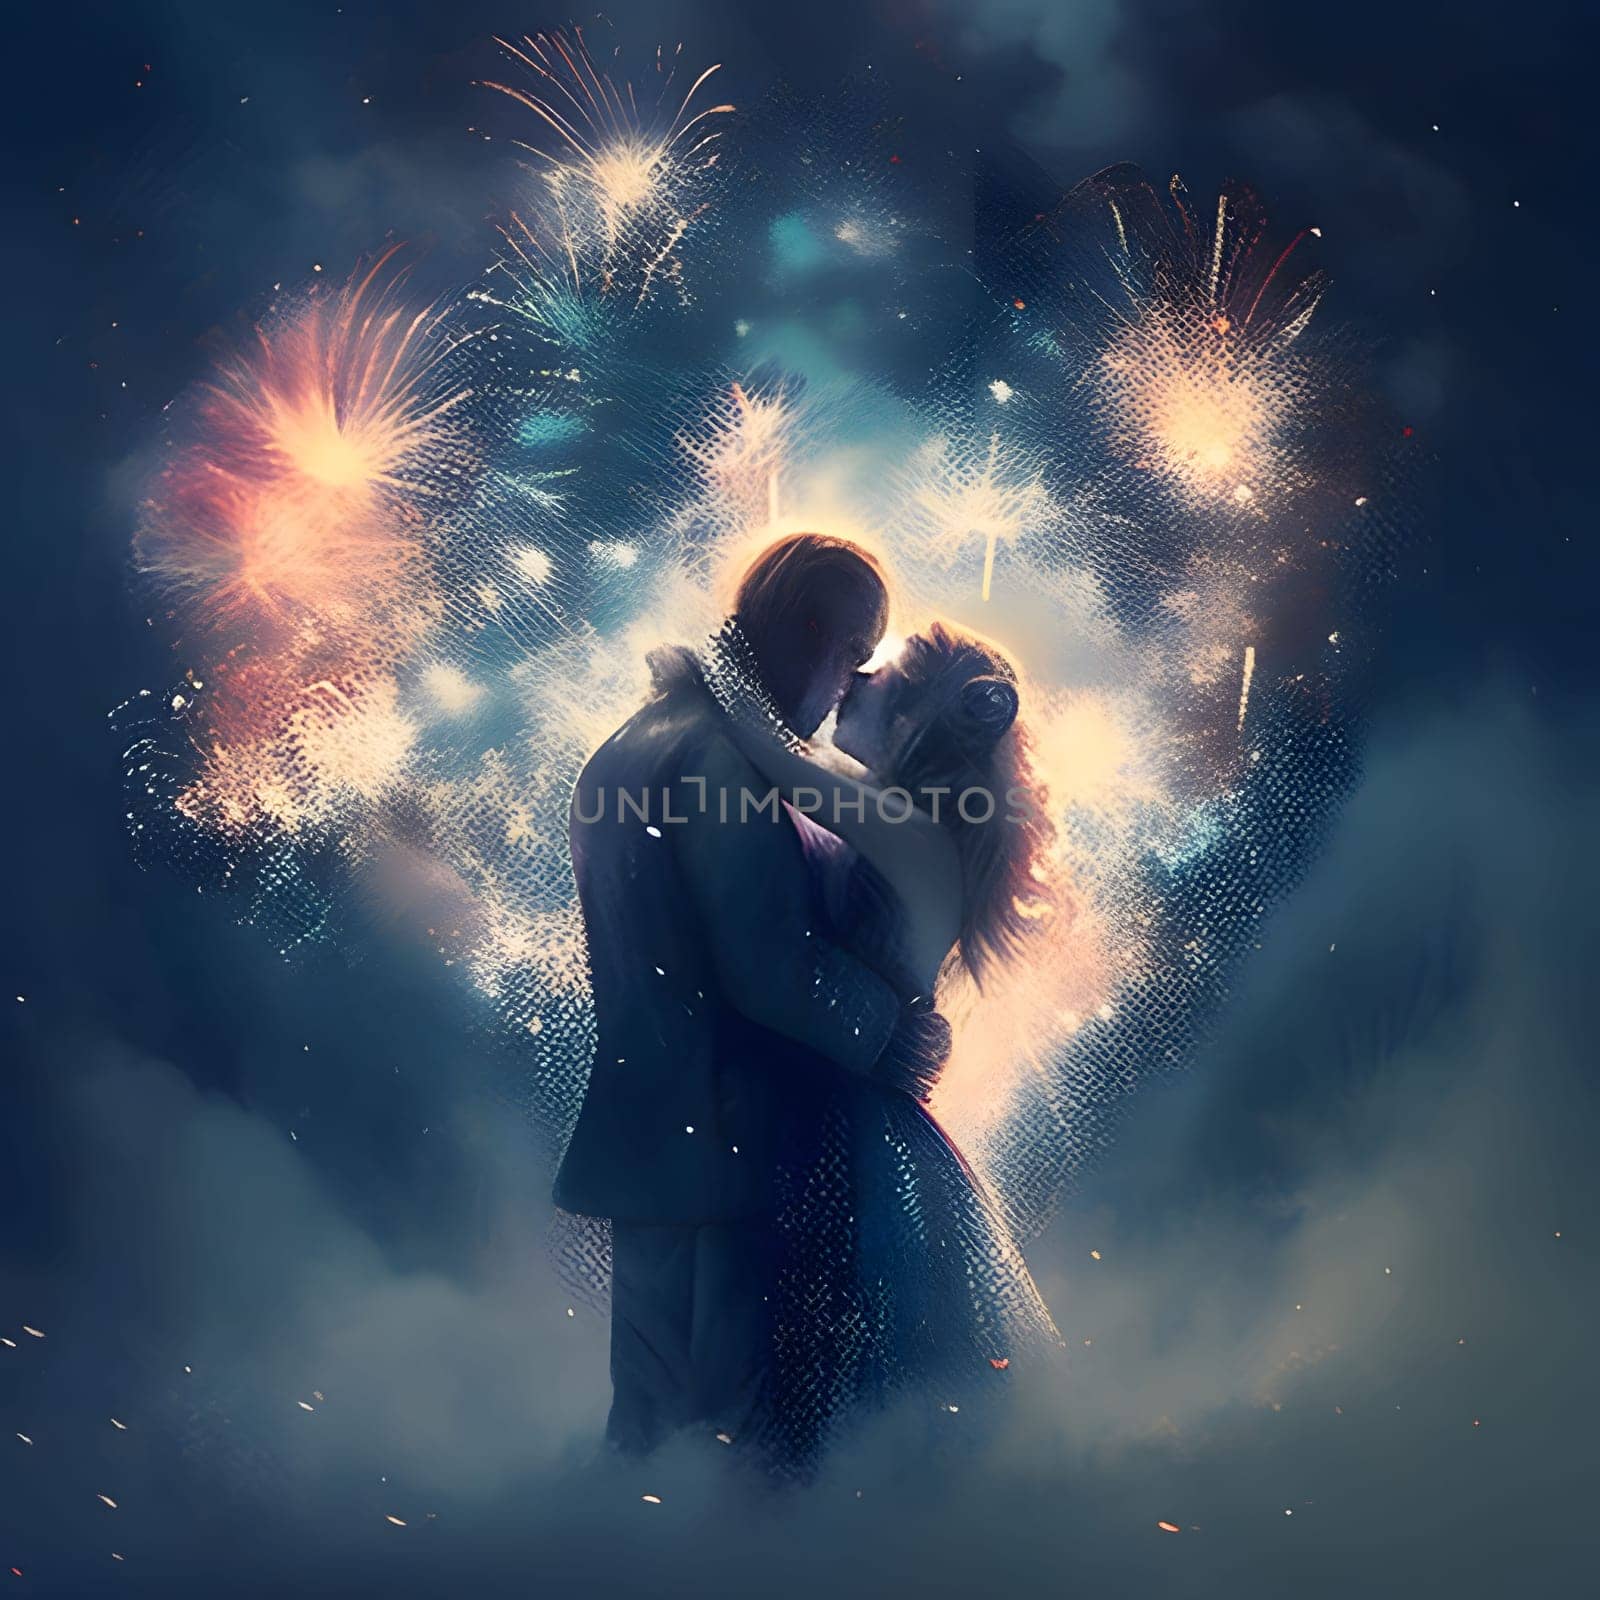 Kissing couple on the background of fireworks, illustration, paint. New Year's fun and festivities. A time of celebration and resolutions.